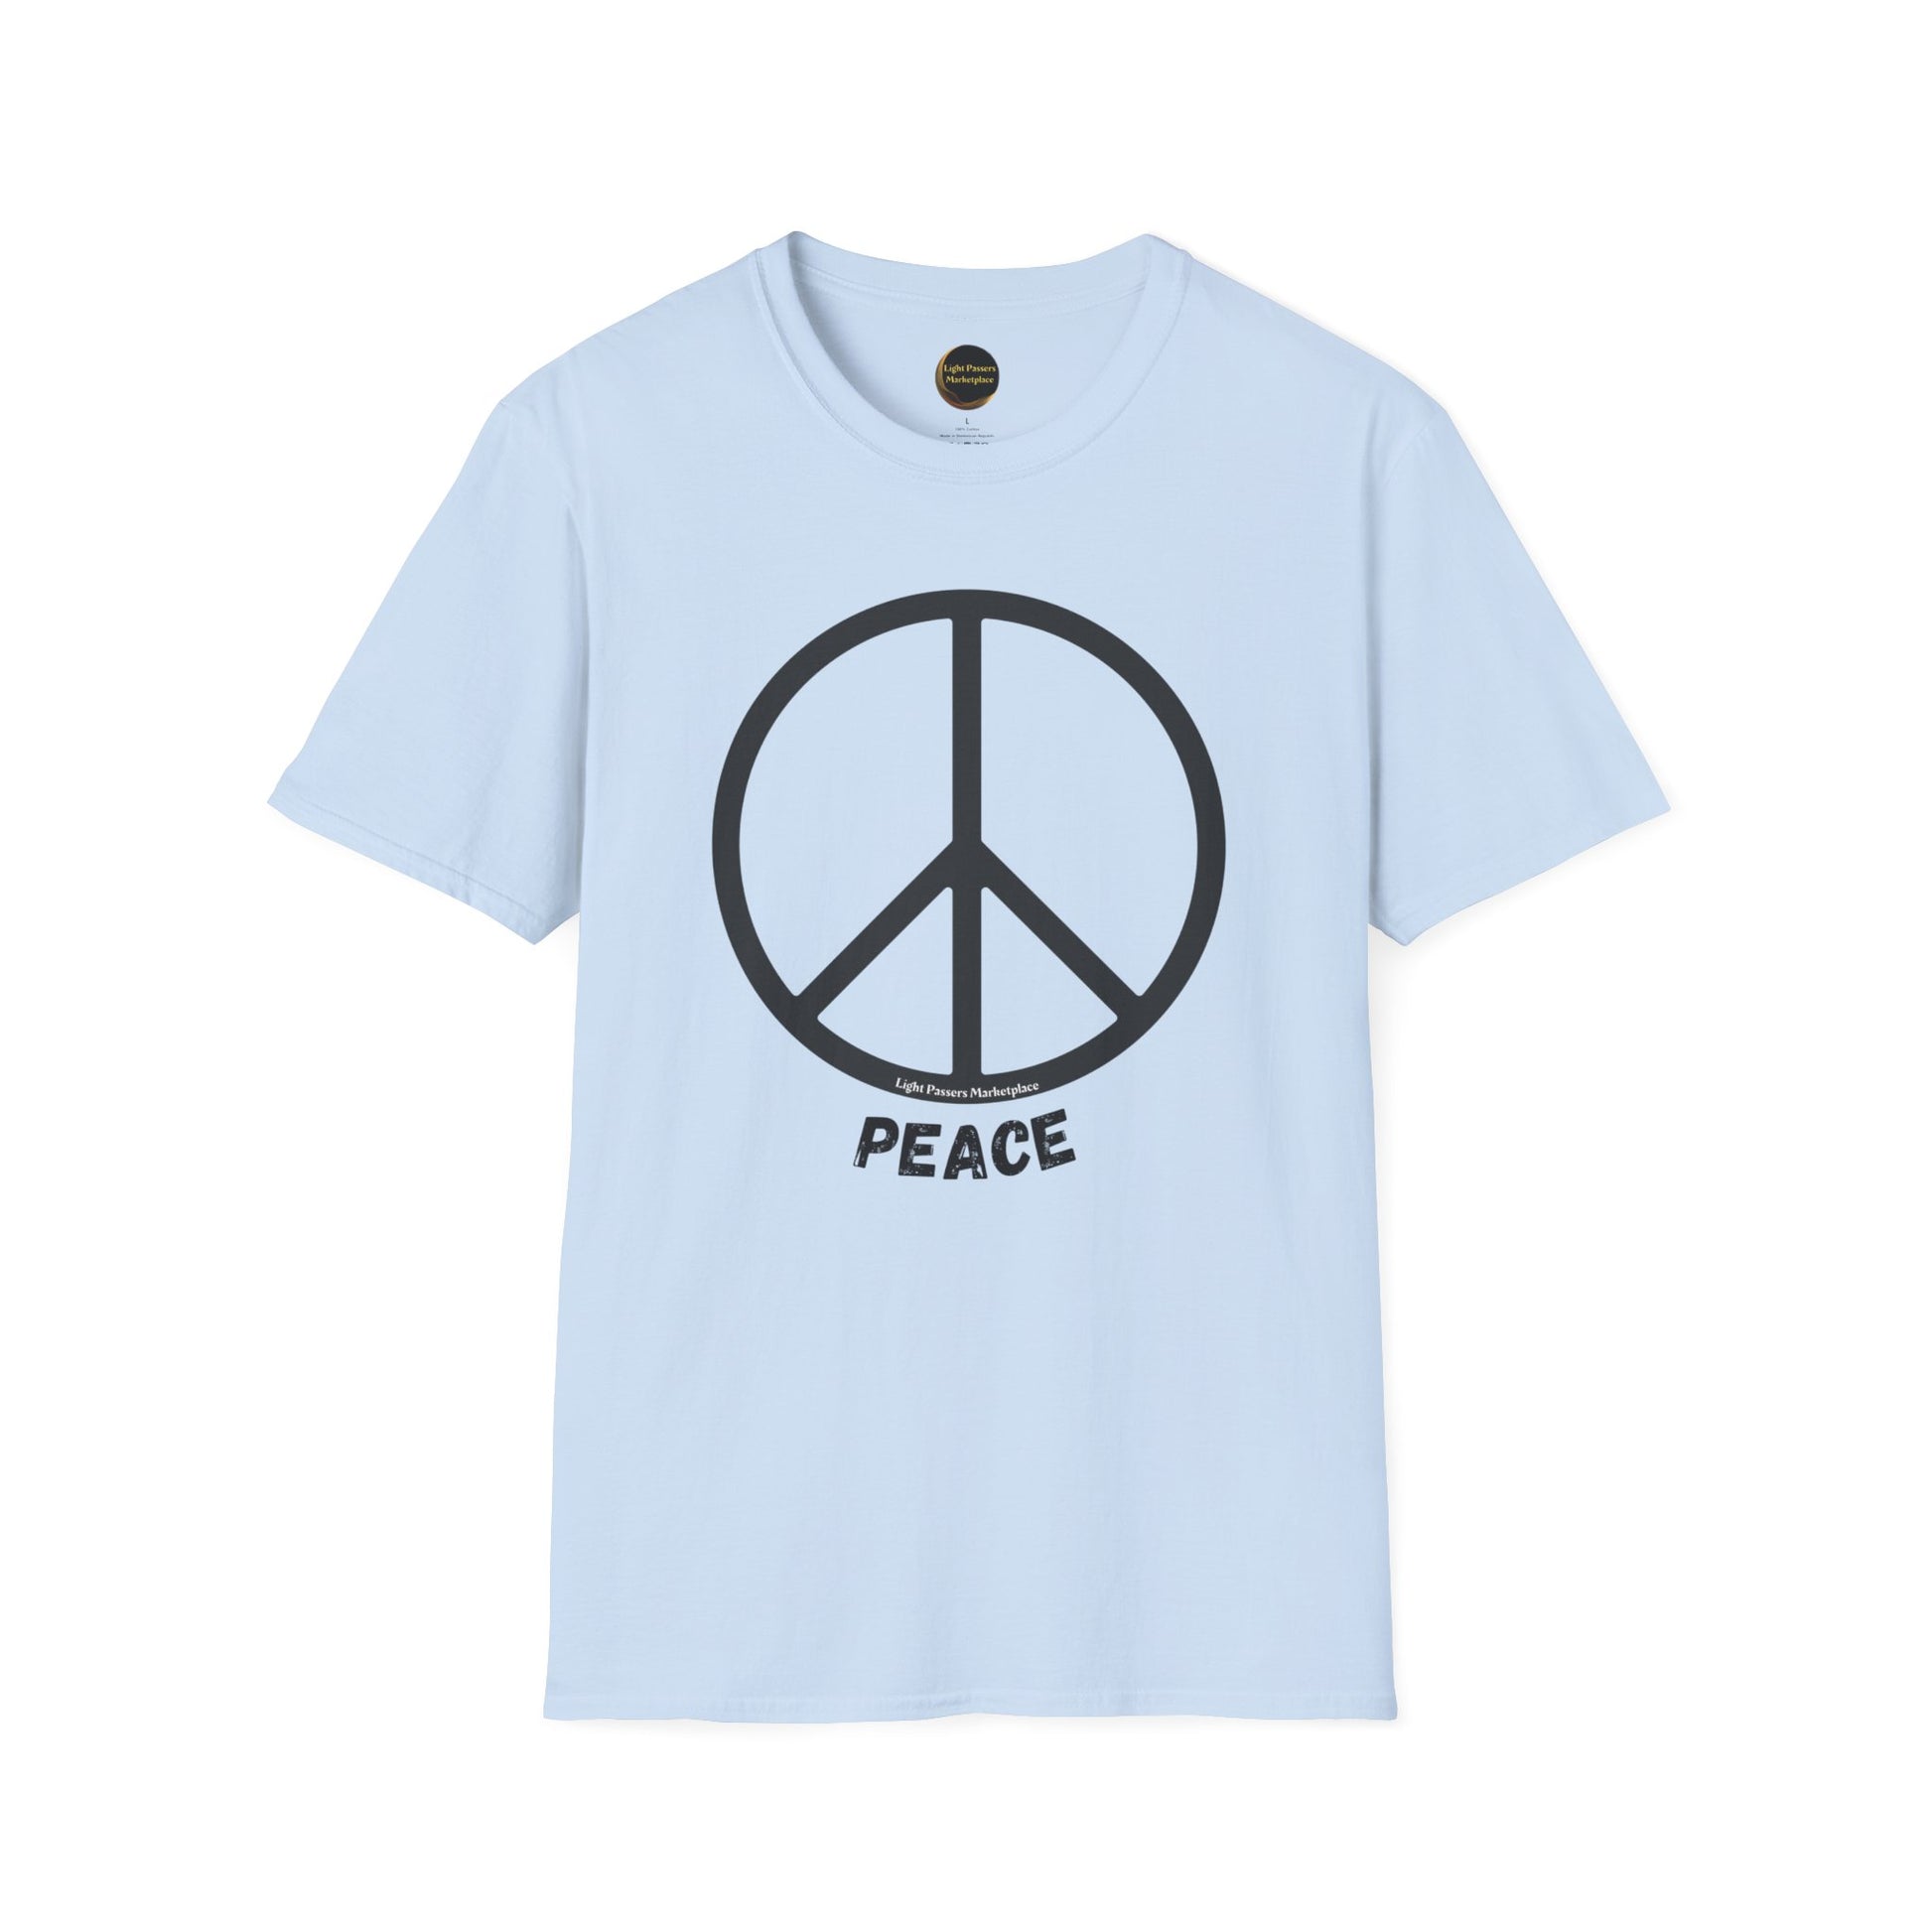 A soft, 100% cotton unisex t-shirt featuring a peace symbol. Lightweight fabric, twill tape shoulders, and ribbed collar for durability and comfort. Ethically made with ring-spun cotton.